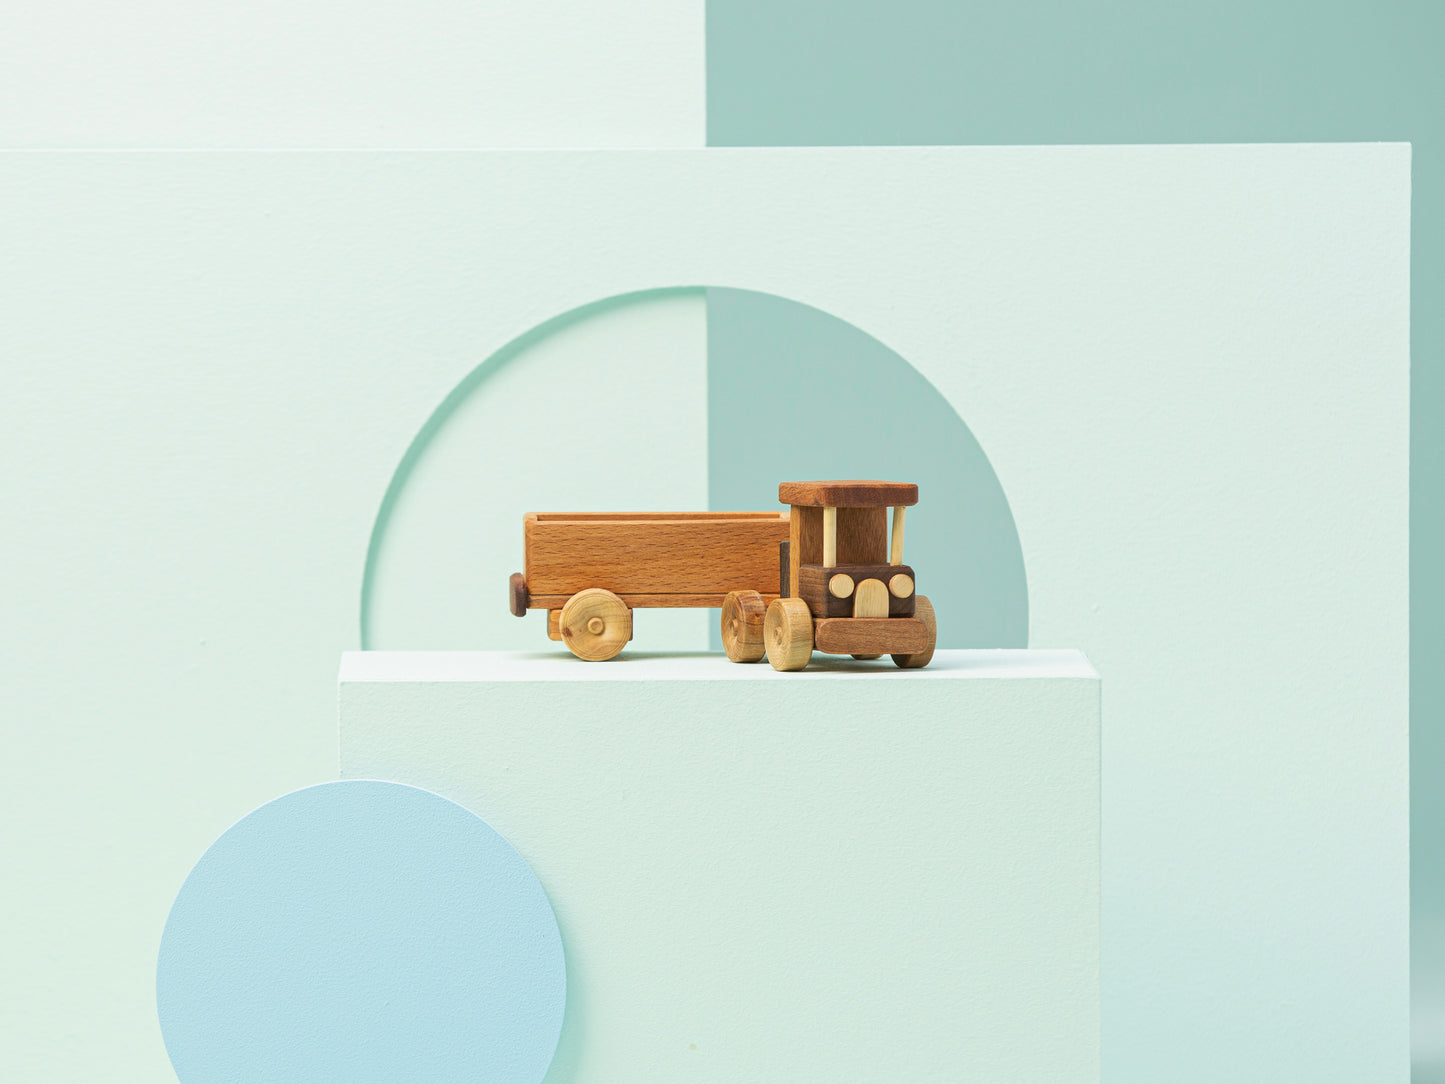 Flatbed Truck Wooden Toy